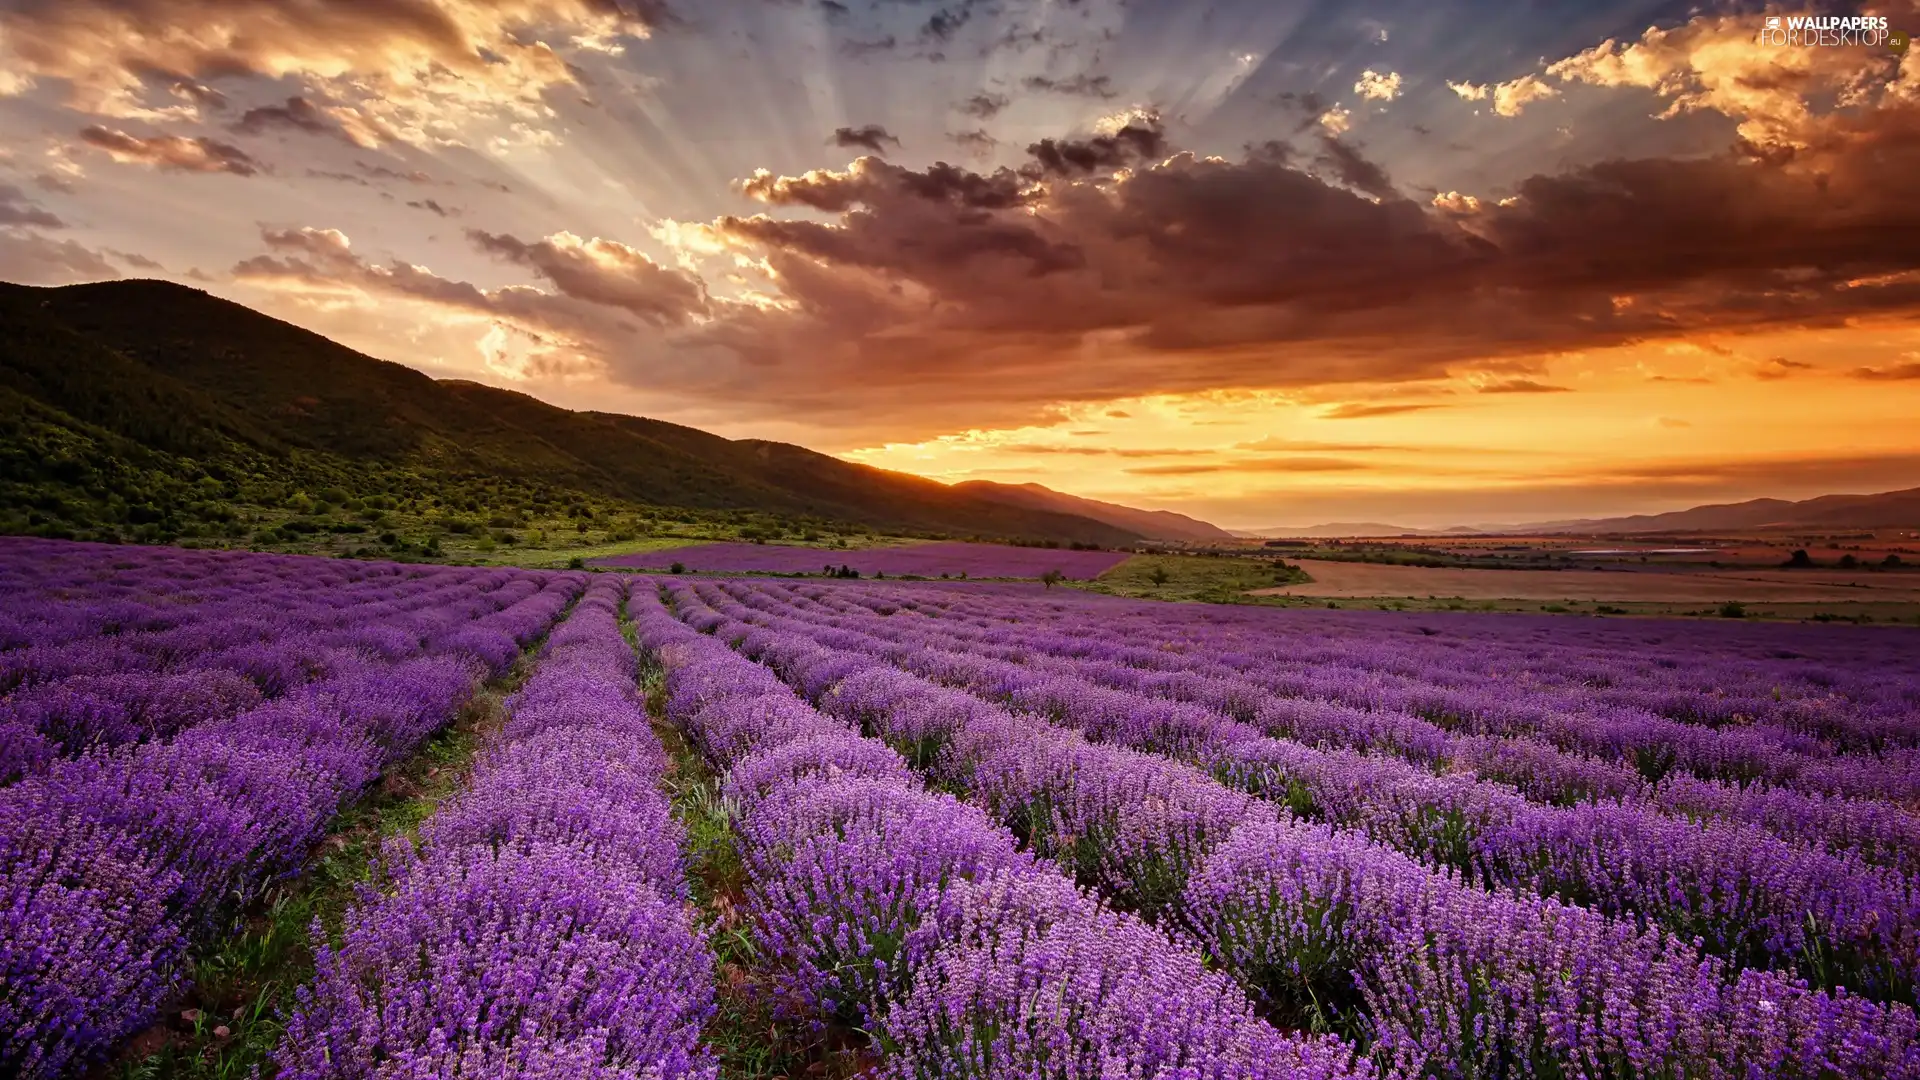 trees, lavender, Great Sunsets, The Hills, Field, viewes, clouds